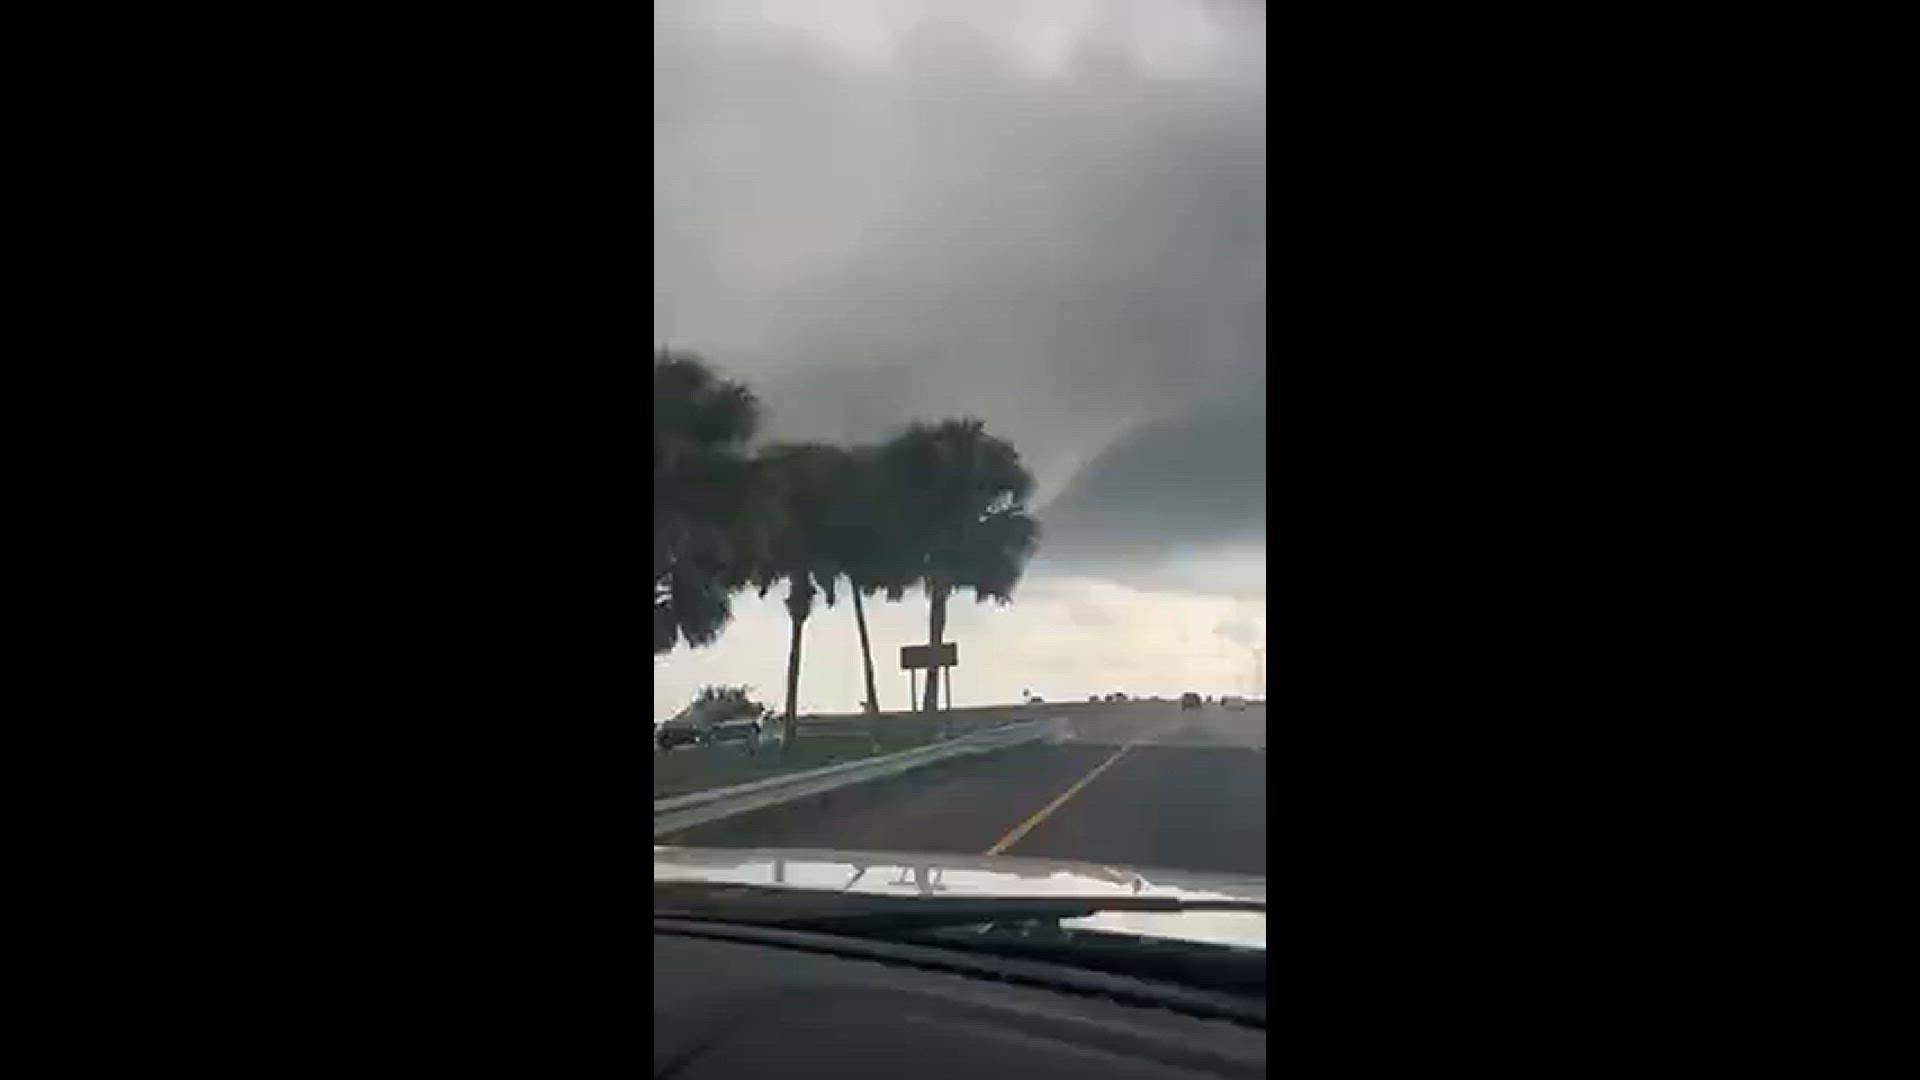 The National Weather Service says the waterspout occurred either in the intracoastal waters or Atlantic waters near Fernandina Beach Tuesday morning.
Credit: Ethan Fields